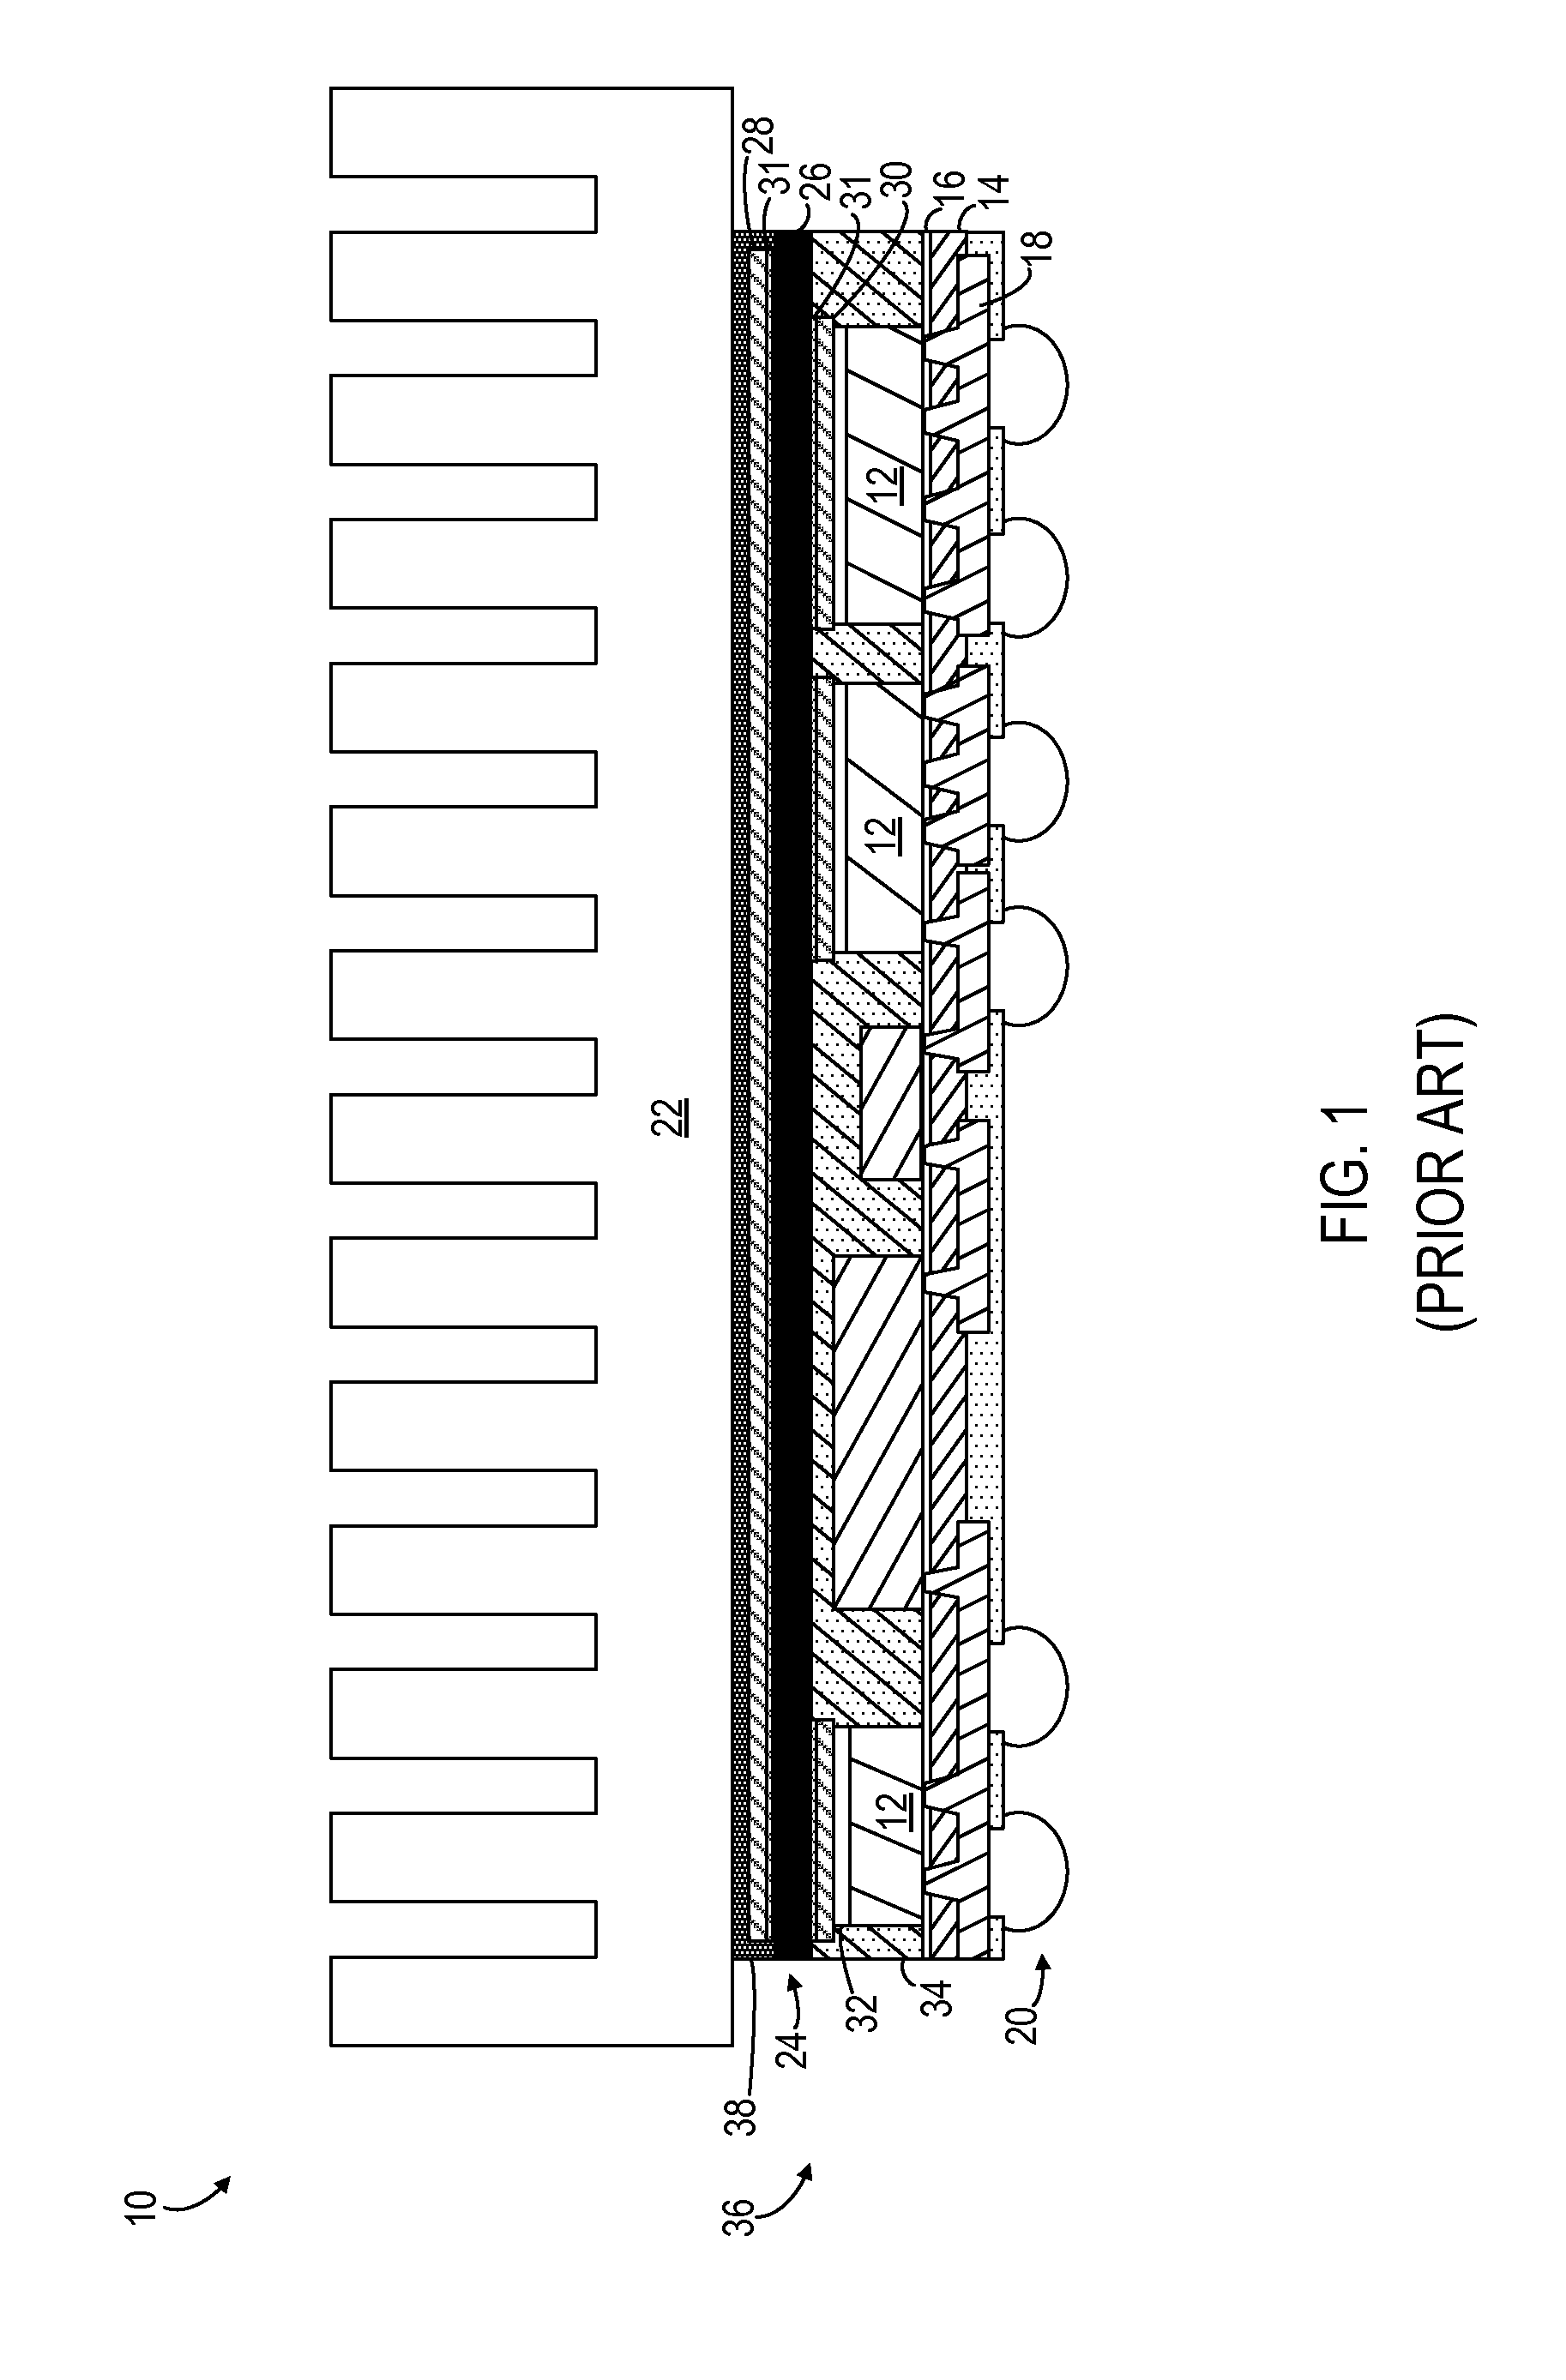 Power overlay structure and method of making same